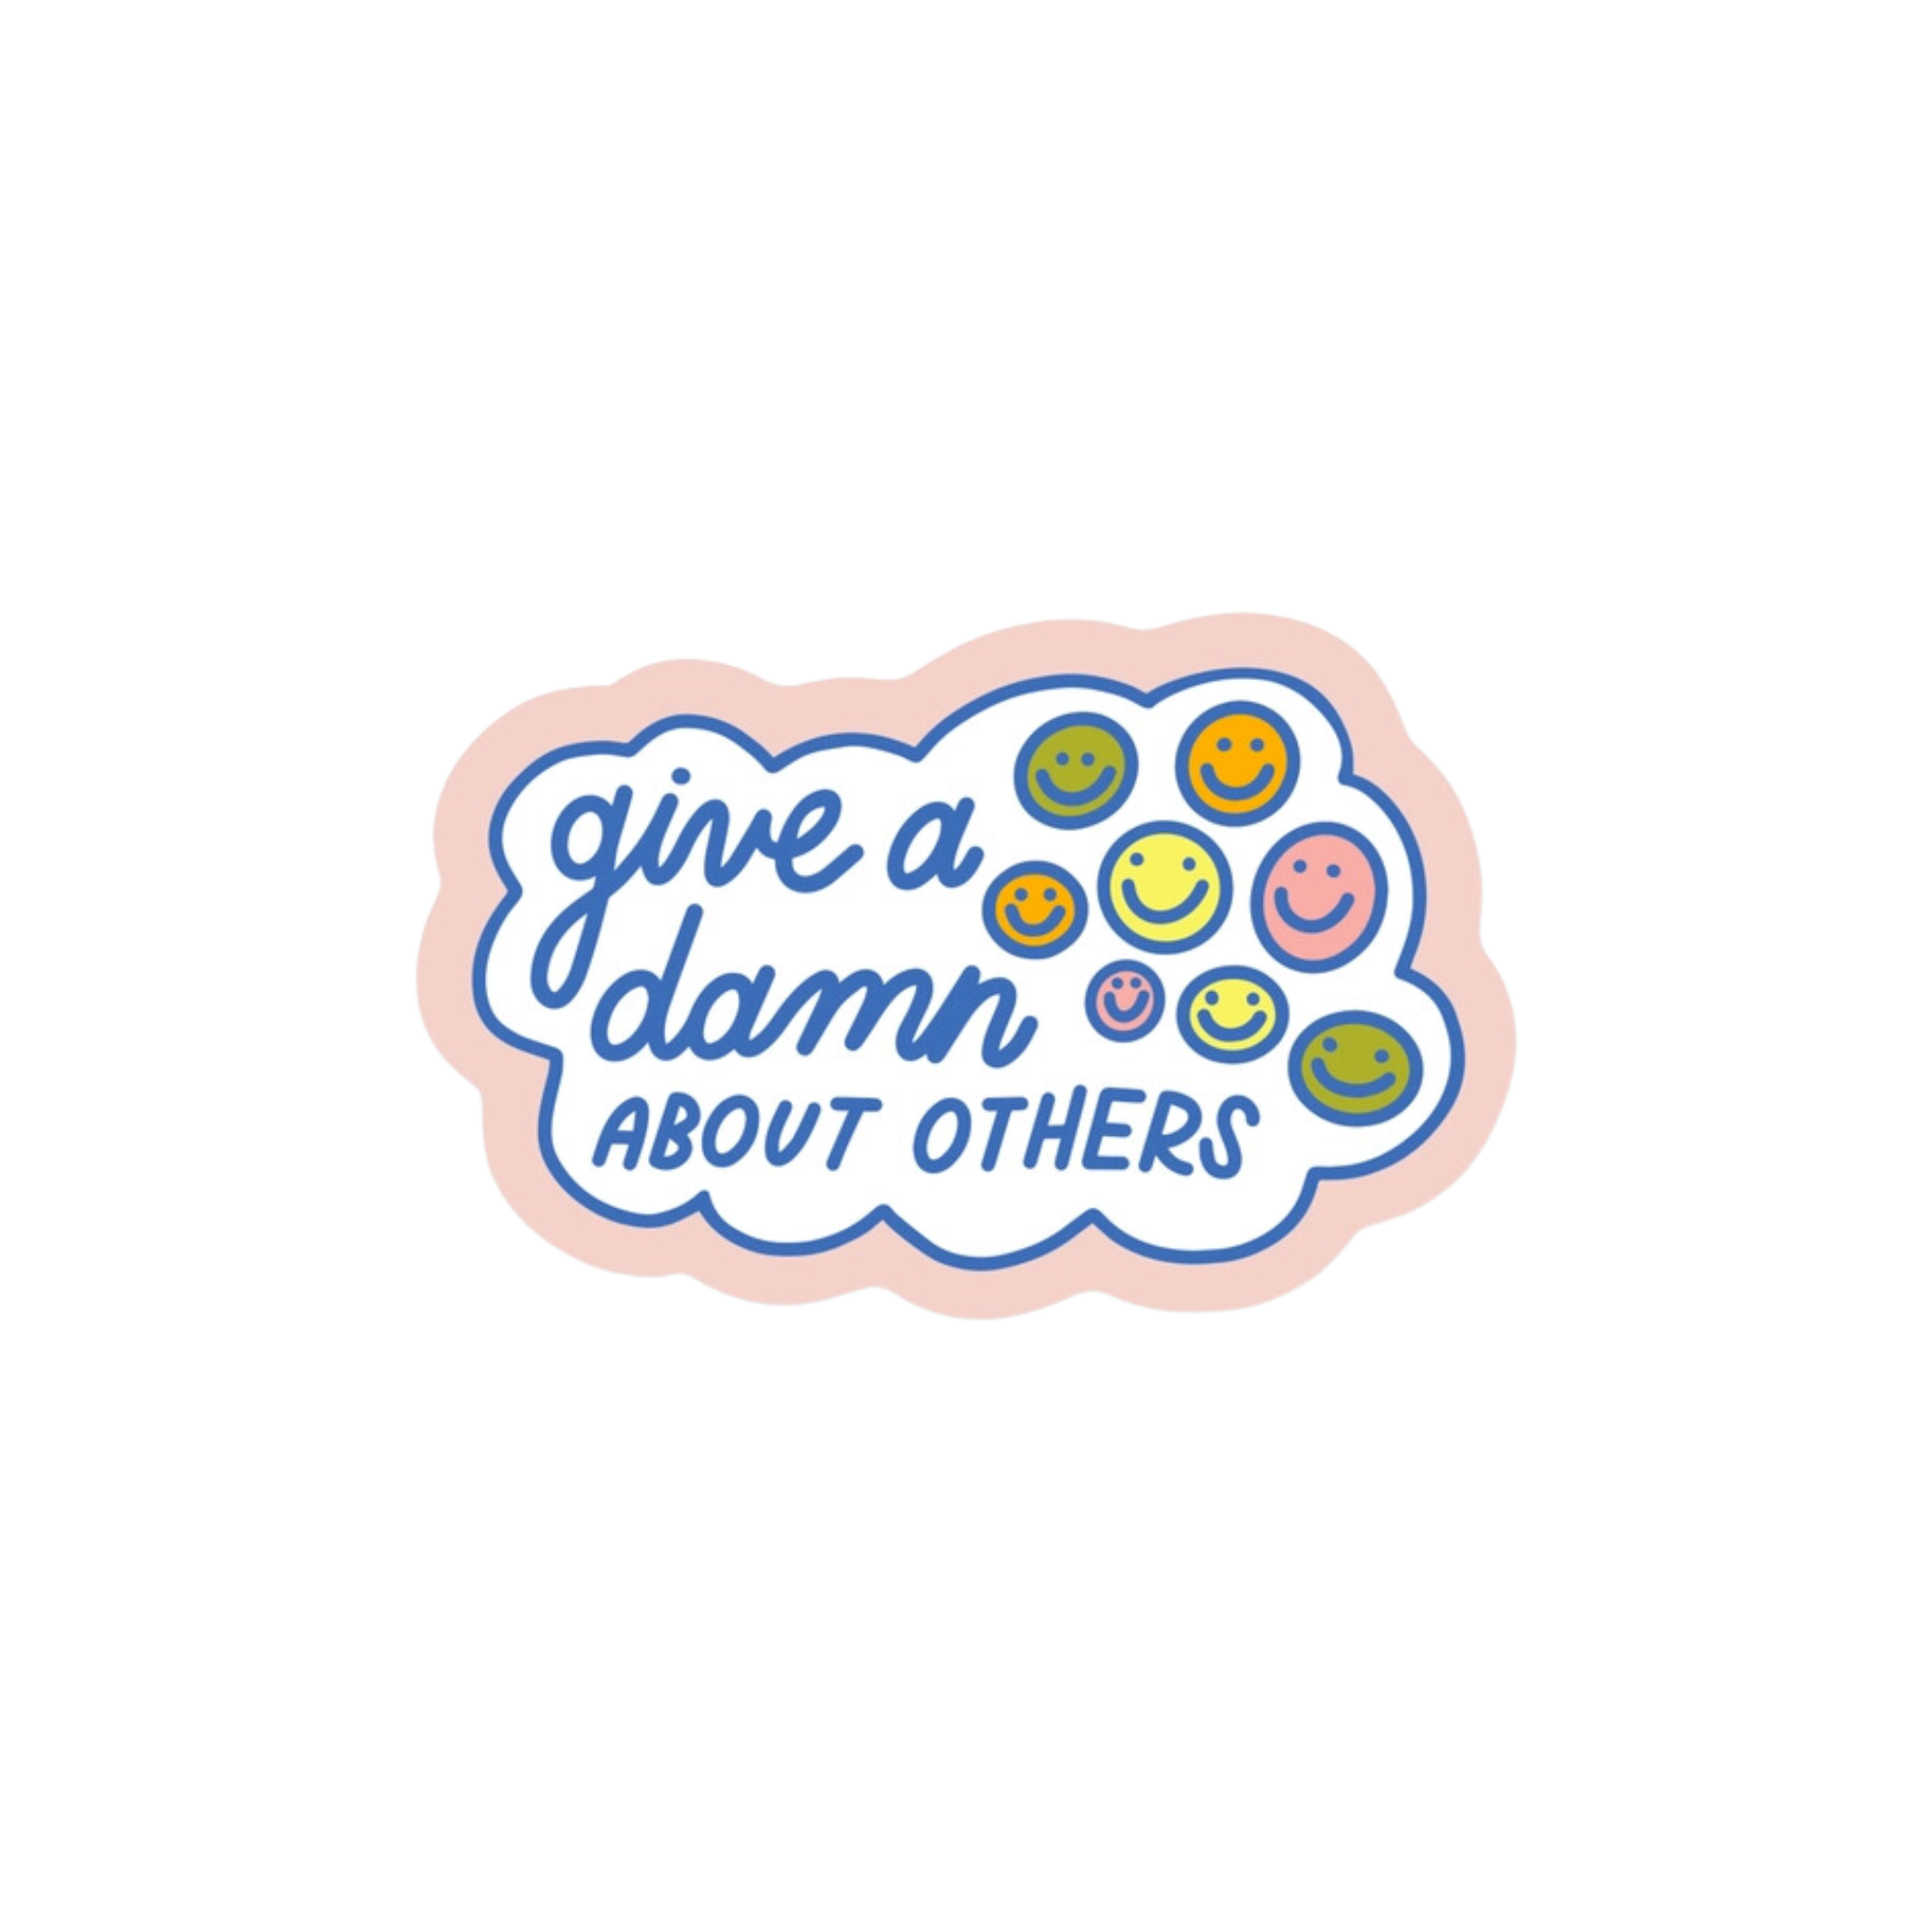 Give a Damn About Others Vinyl Sticker